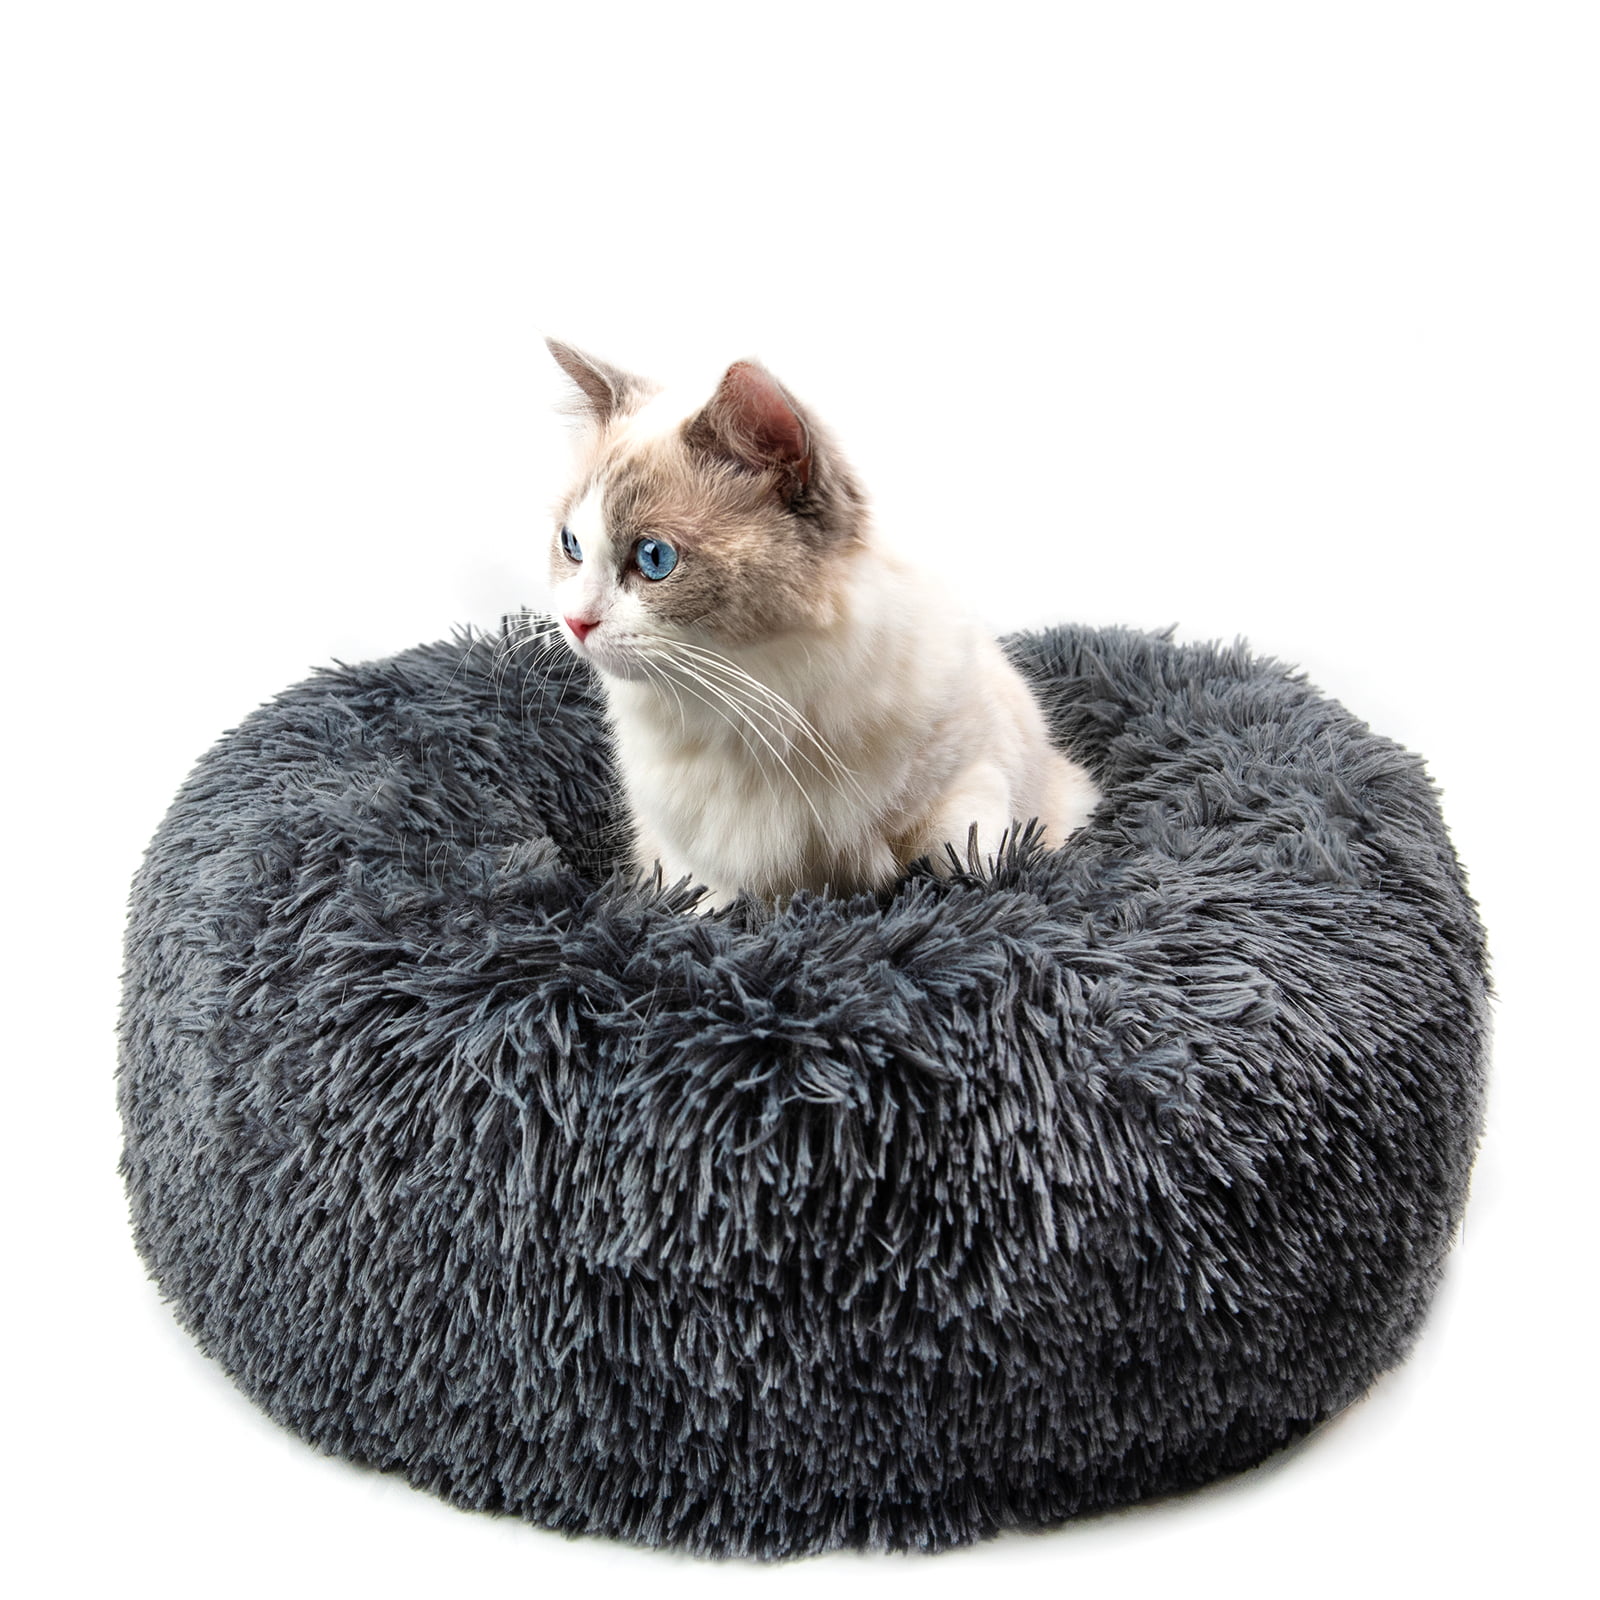 Calming Dog Cat Donut Bed Fluffy Plush Puppy Kitten Cuddler Round Bed Warm and Soft Pet Cosy Anti Anxiety Beds with Non-Slip Bottom and Washable M 19.7in, Grey